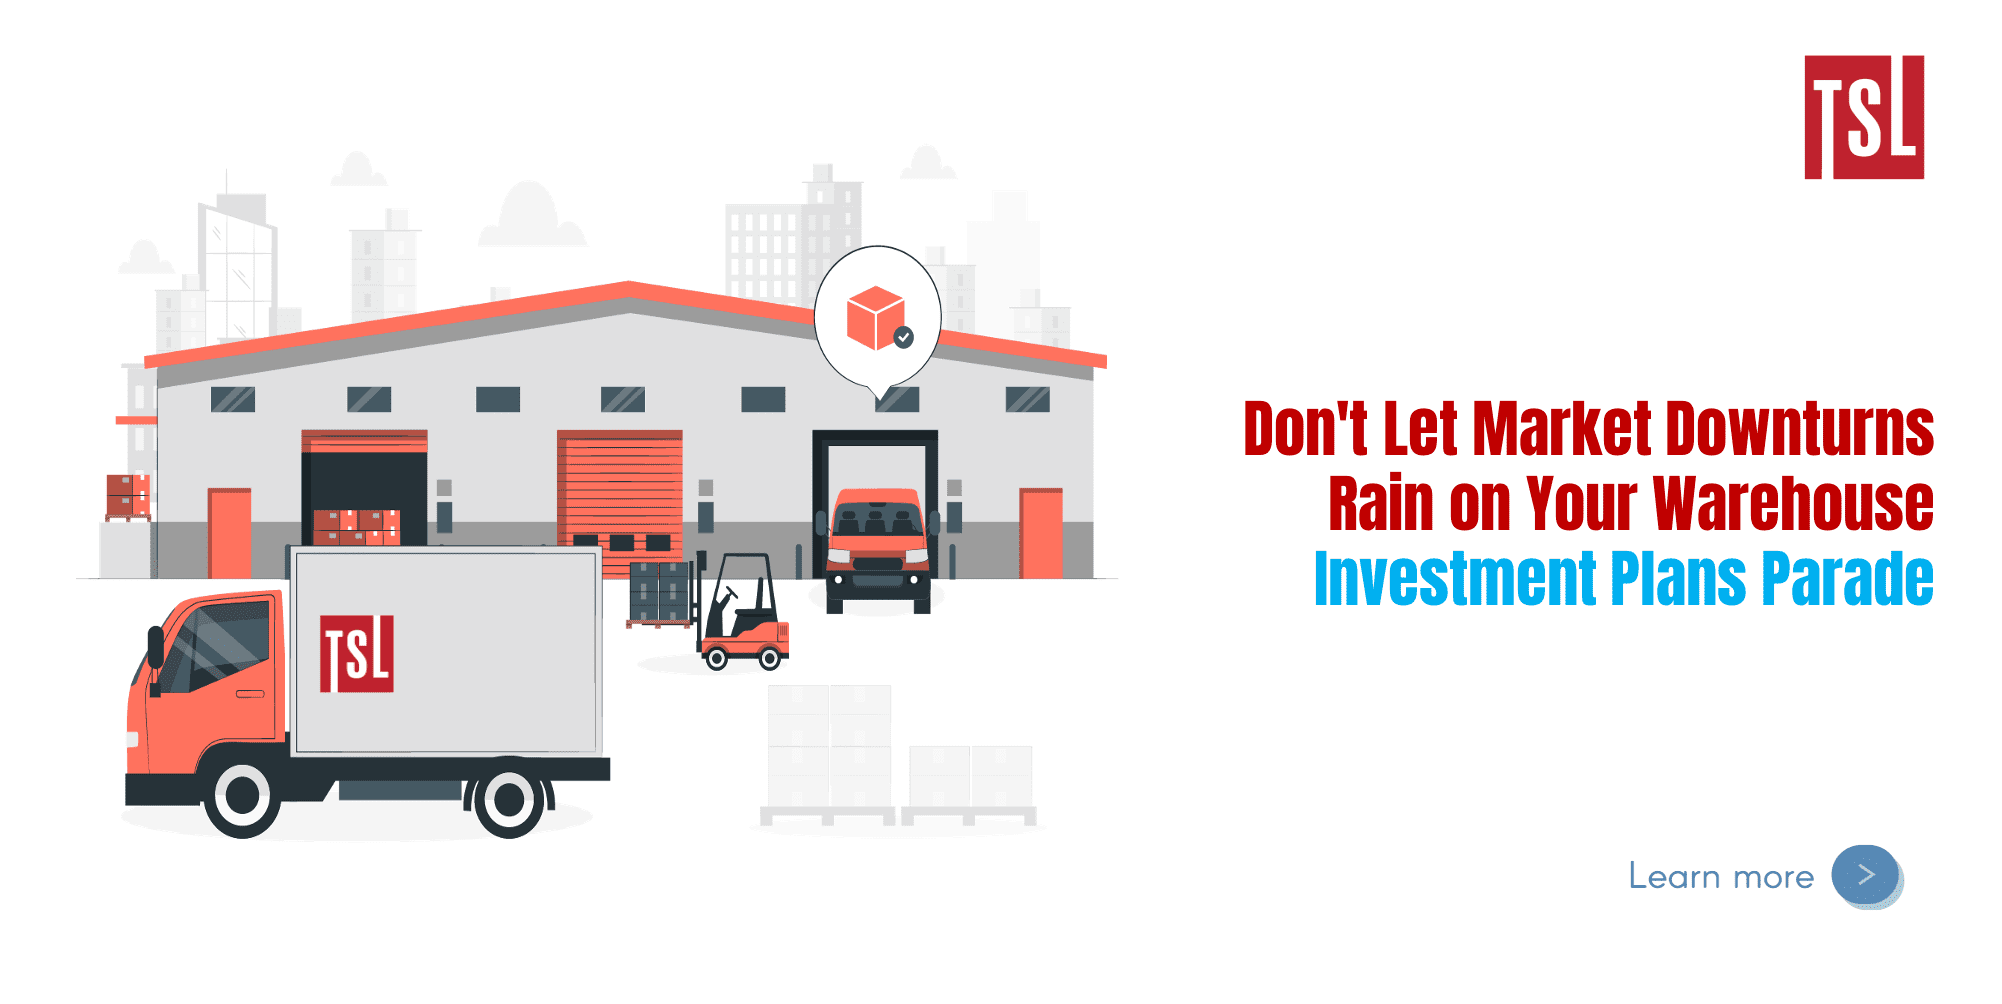 Don’t Let Market Downturns Rain on Your Warehouse Investment Plans Parade